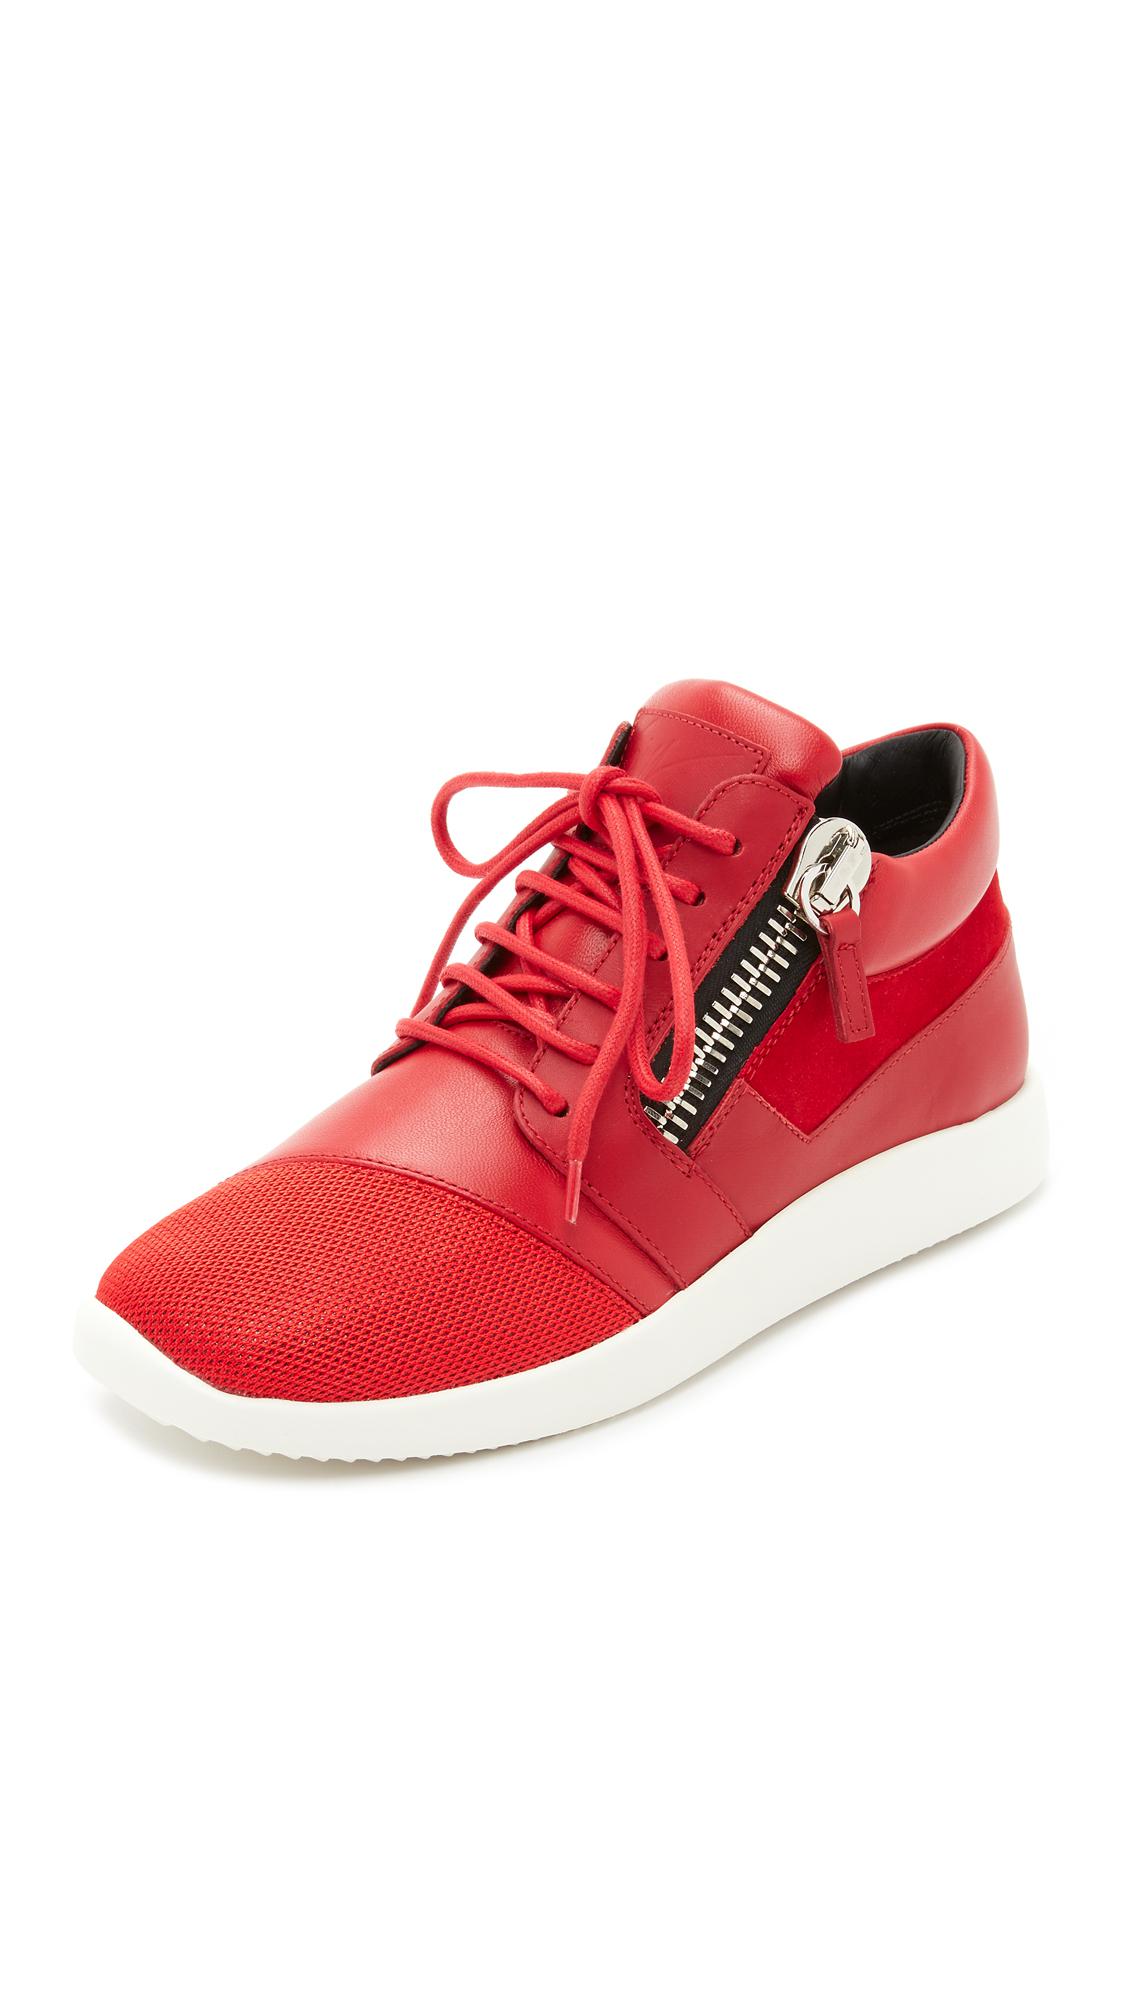 Lyst - Giuseppe Zanotti Sneakers in Red - Save 40.0%